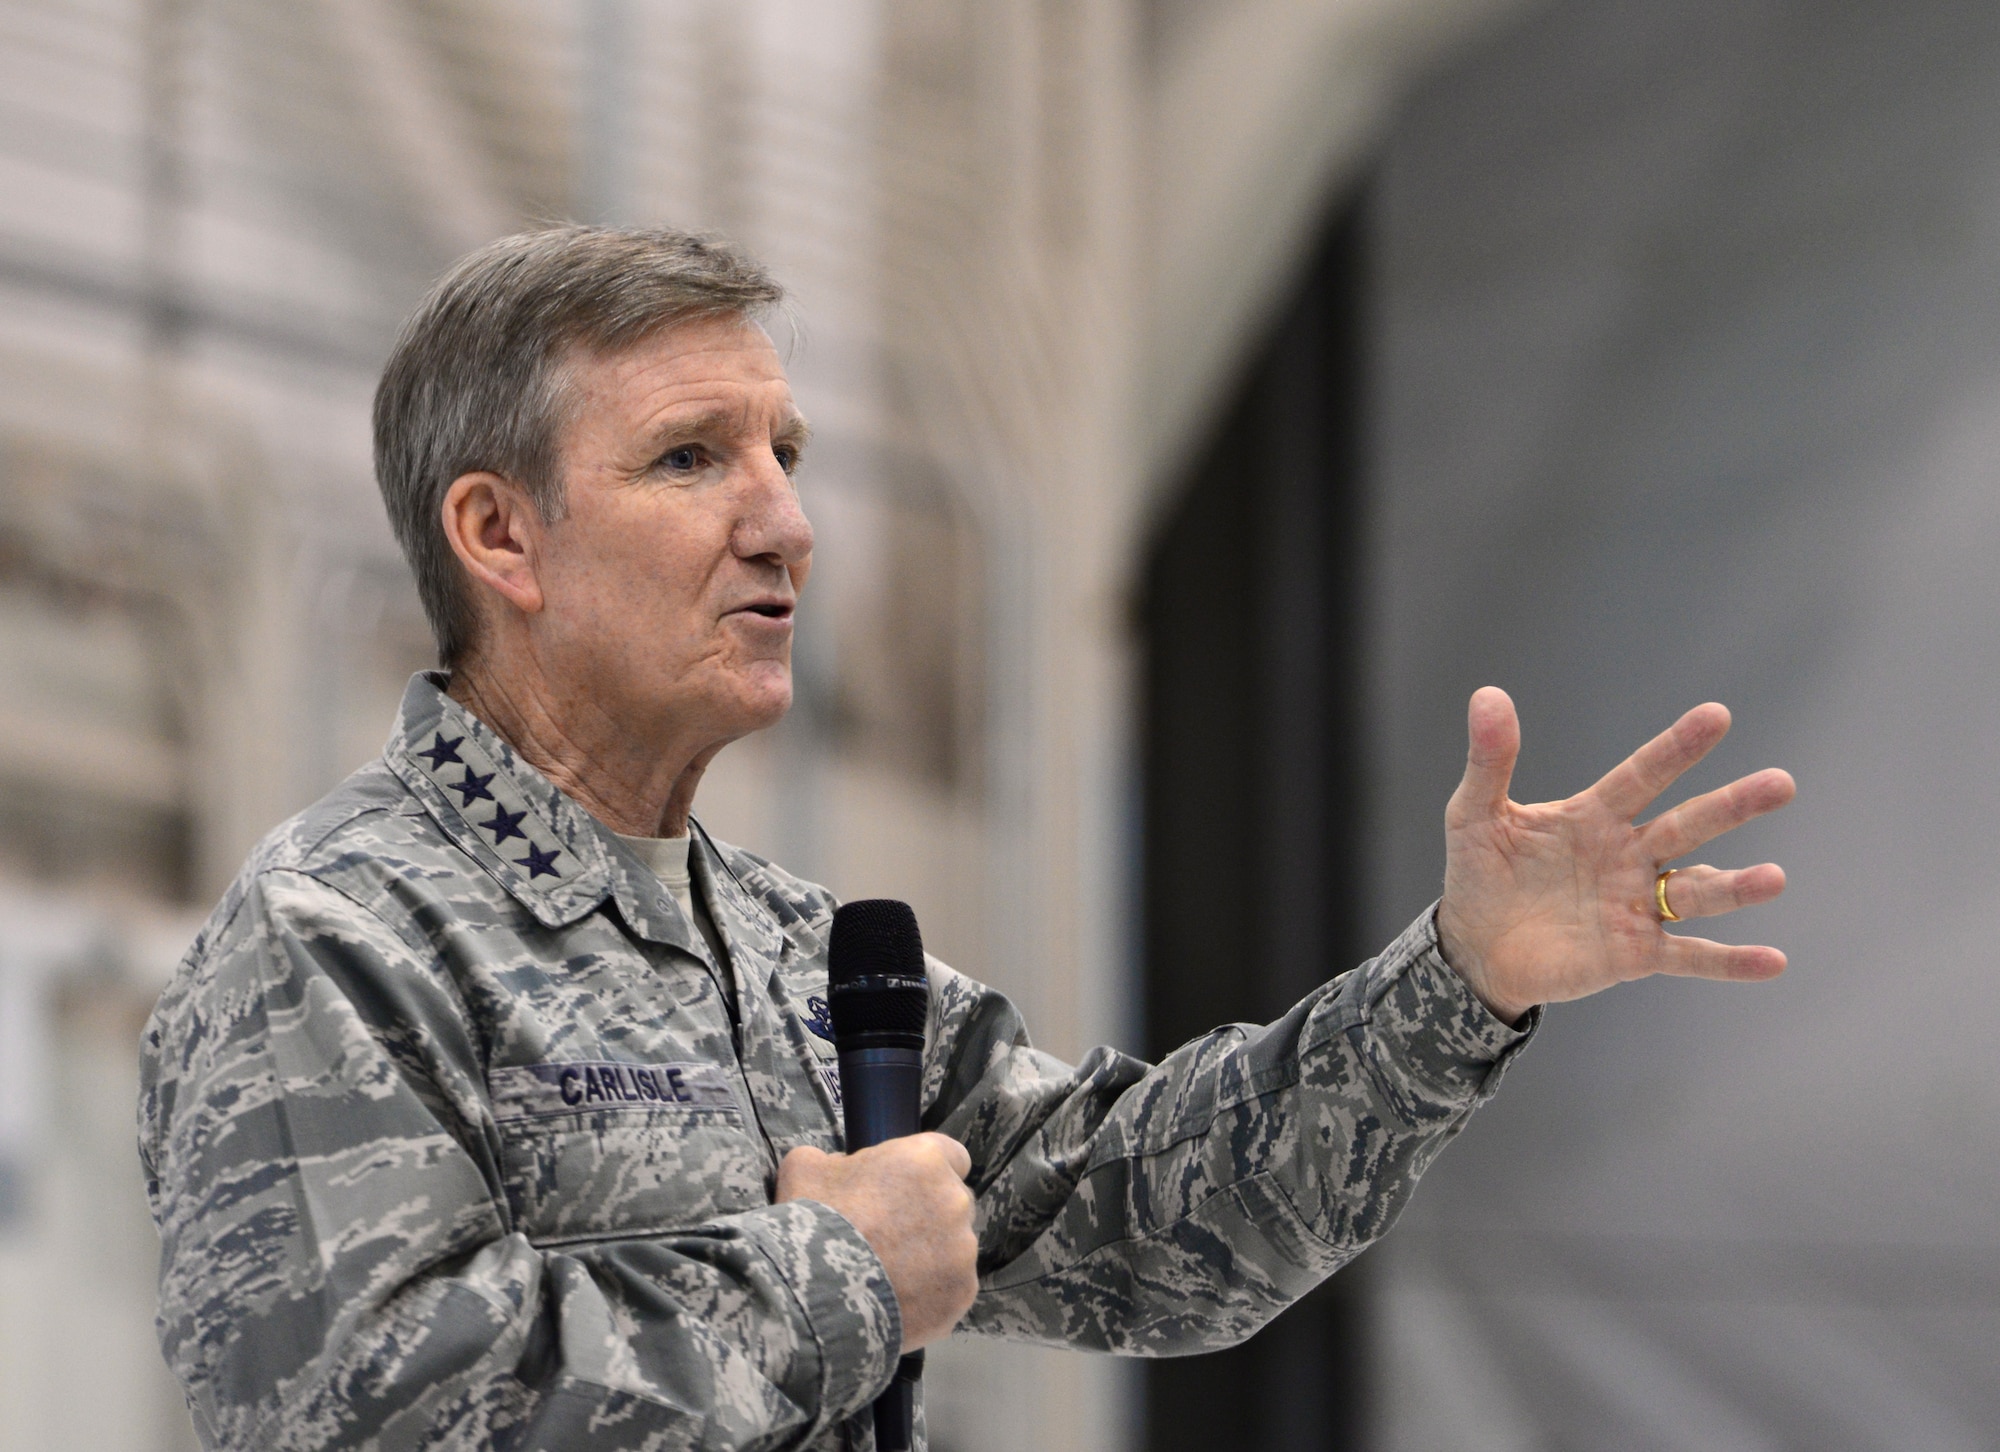 Gen. Hawk Carlisle, commander of Air Combat Command, briefs Airmen of the 432nd Wing/432nd Air Expeditionary Wing Jan. 14, 2016, during his visit to Creech Air Force Base, Nevada. During the all-call, Carlisle recapped the findings of the Culture and Process Improvement Program, an initiative which studied challenges within the remotely piloted aircraft enterprise. He also explained the measures the Air Force is taking to alleviate the problems. (U.S. Air Force photo by Senior Airman Christian Clausen/Released)